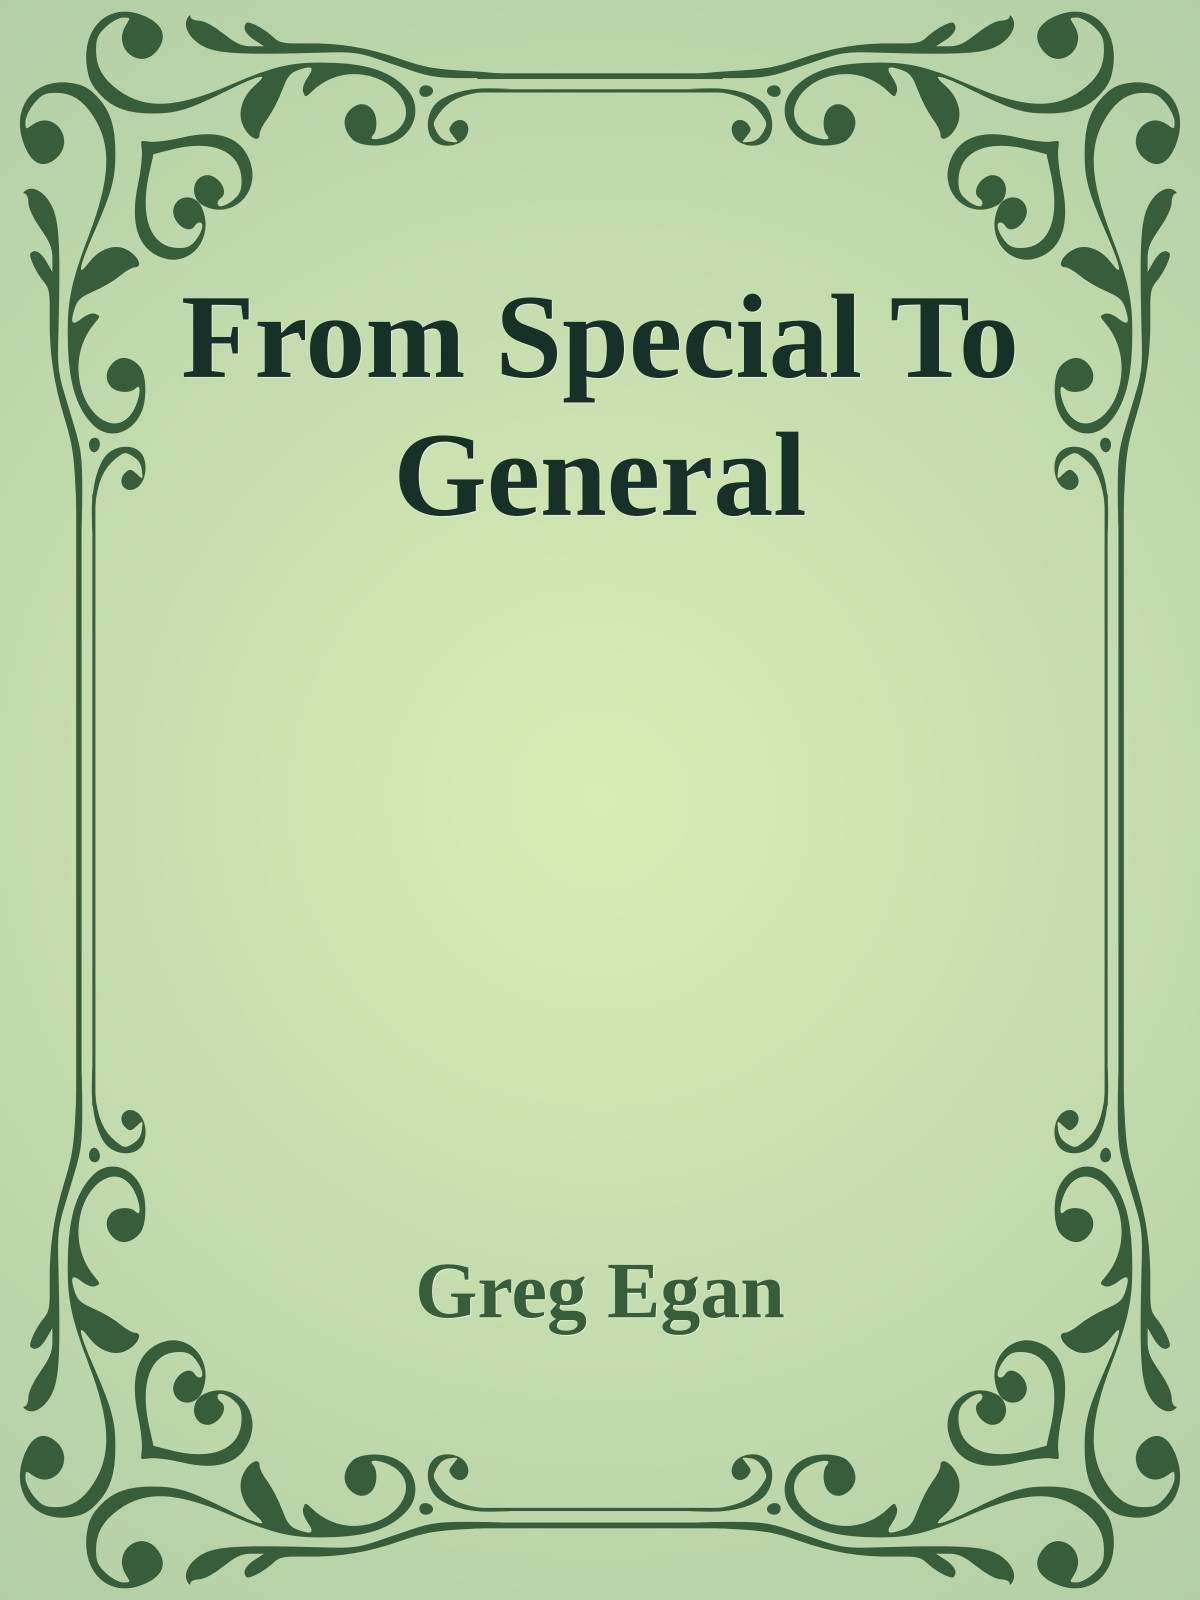 From Special To General